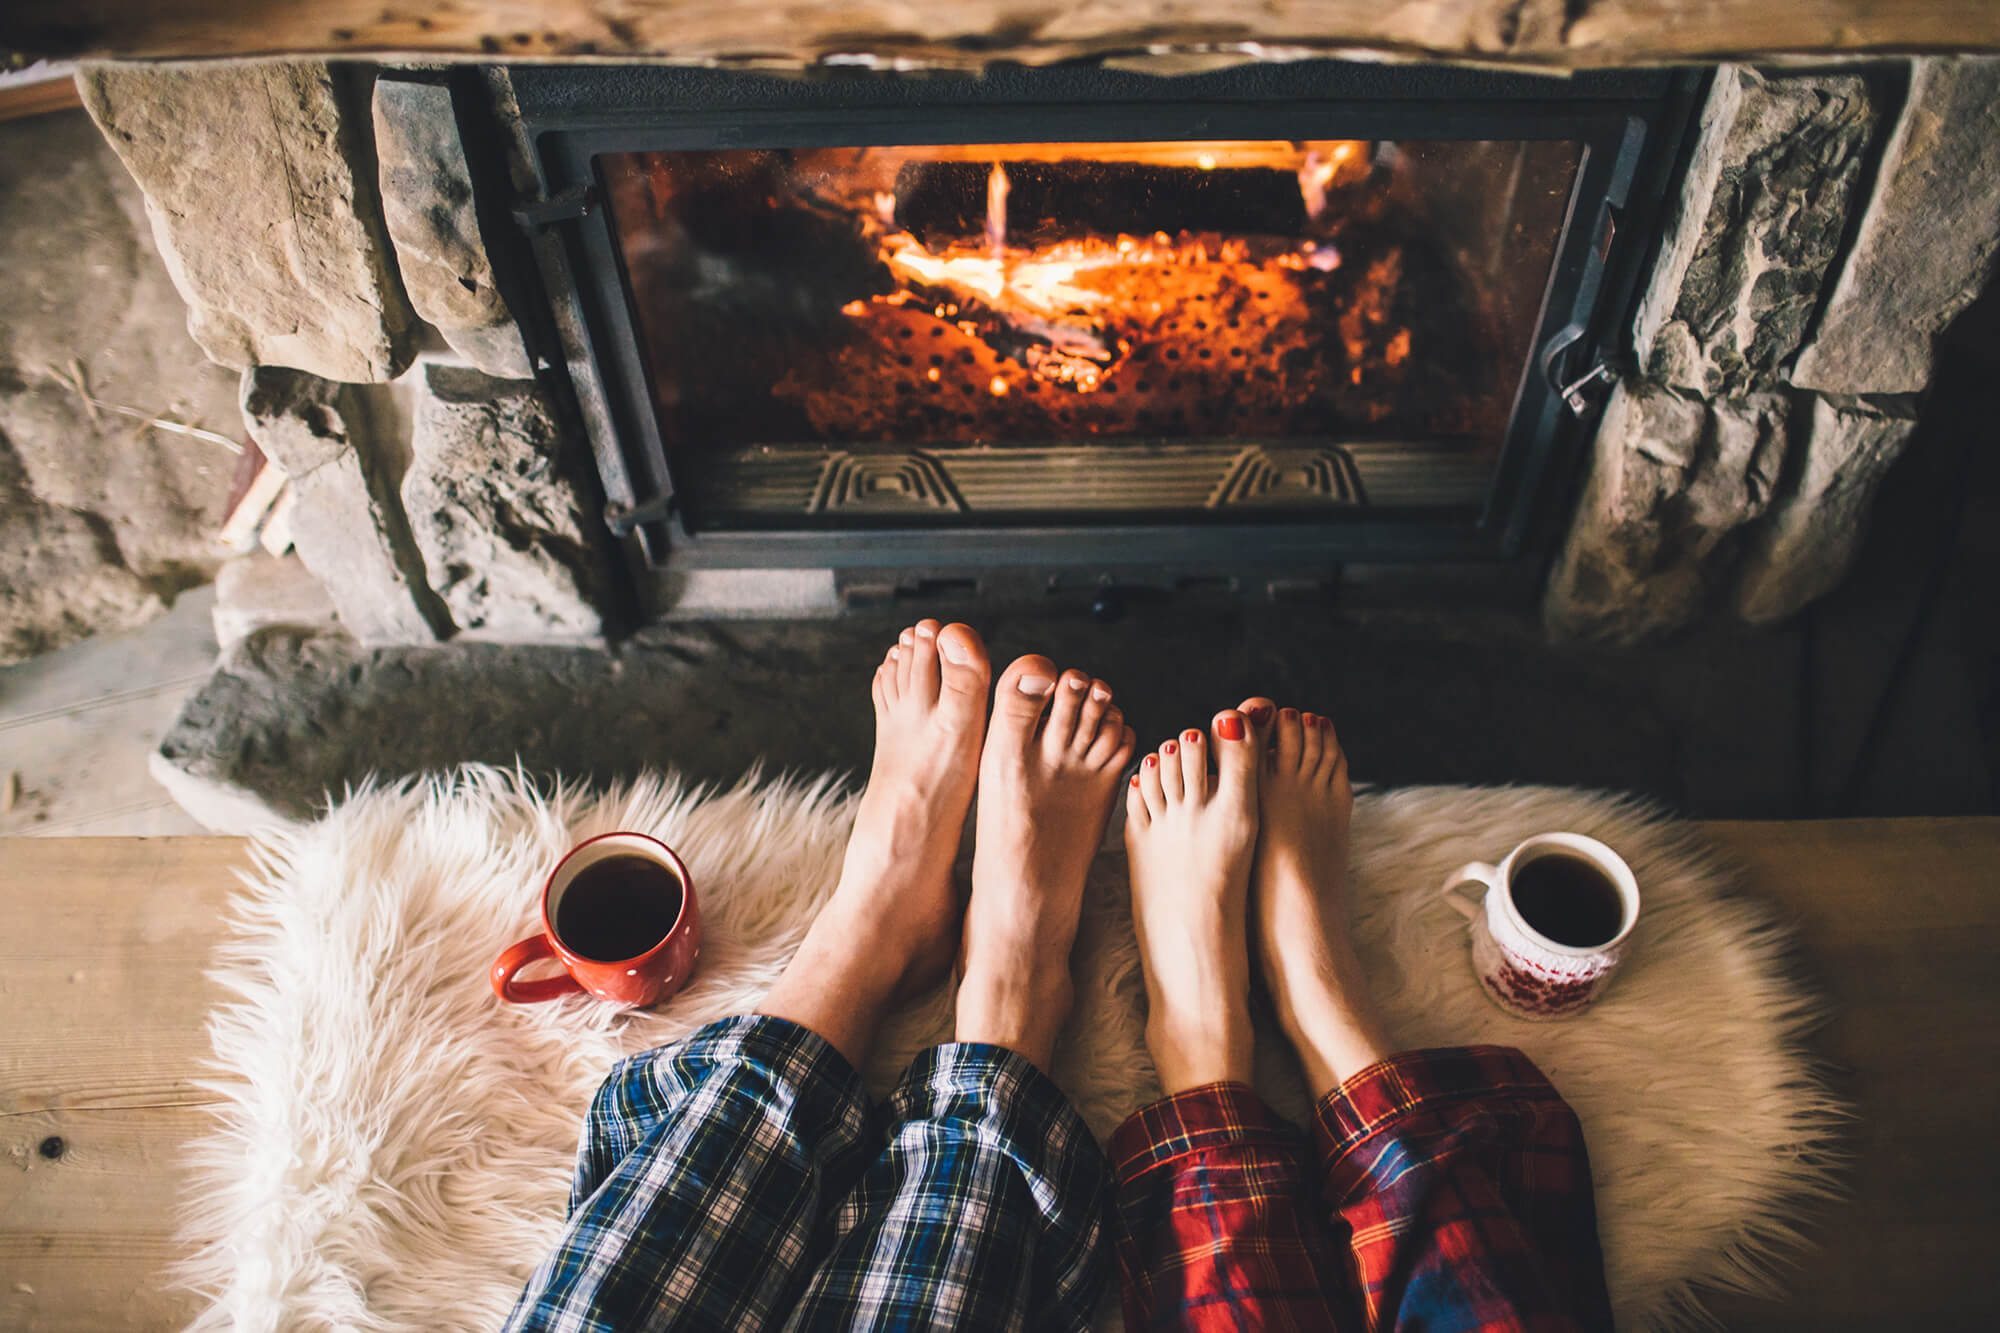 Staying warm by the fireplace | Stiles Heating, Cooling, & Plumbing